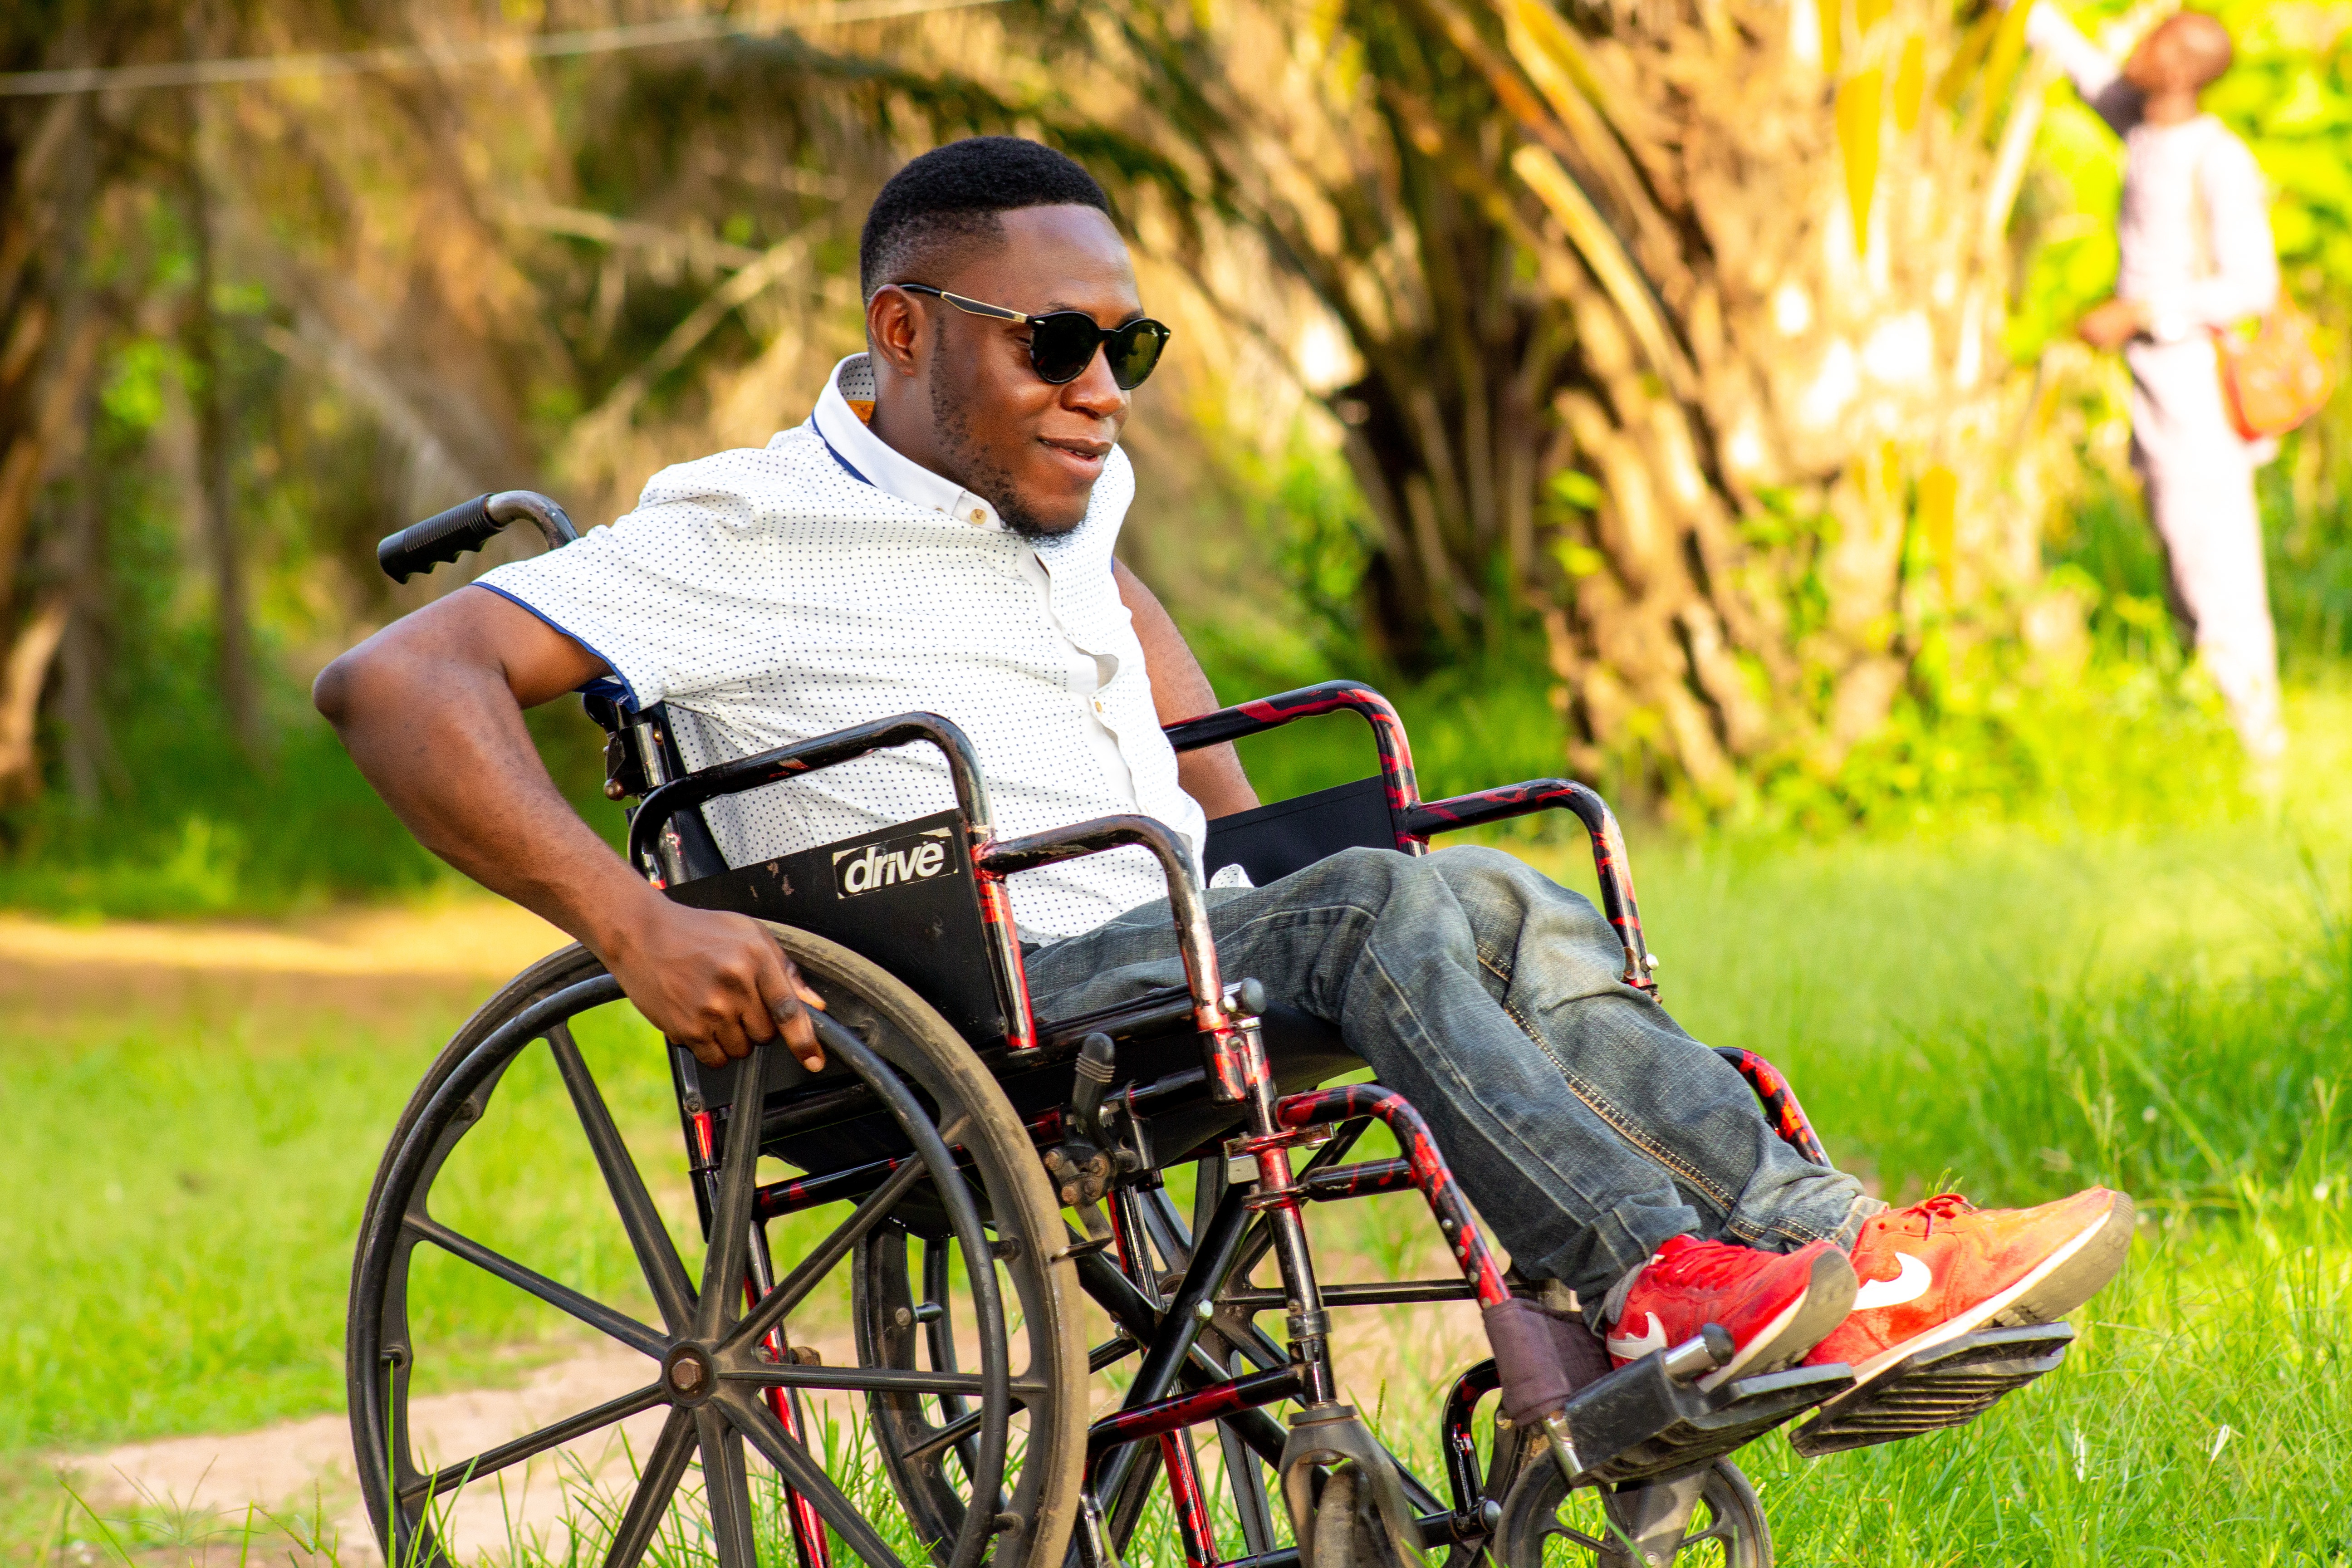 AFCON 2021, the needs of disabled fans are not ignored